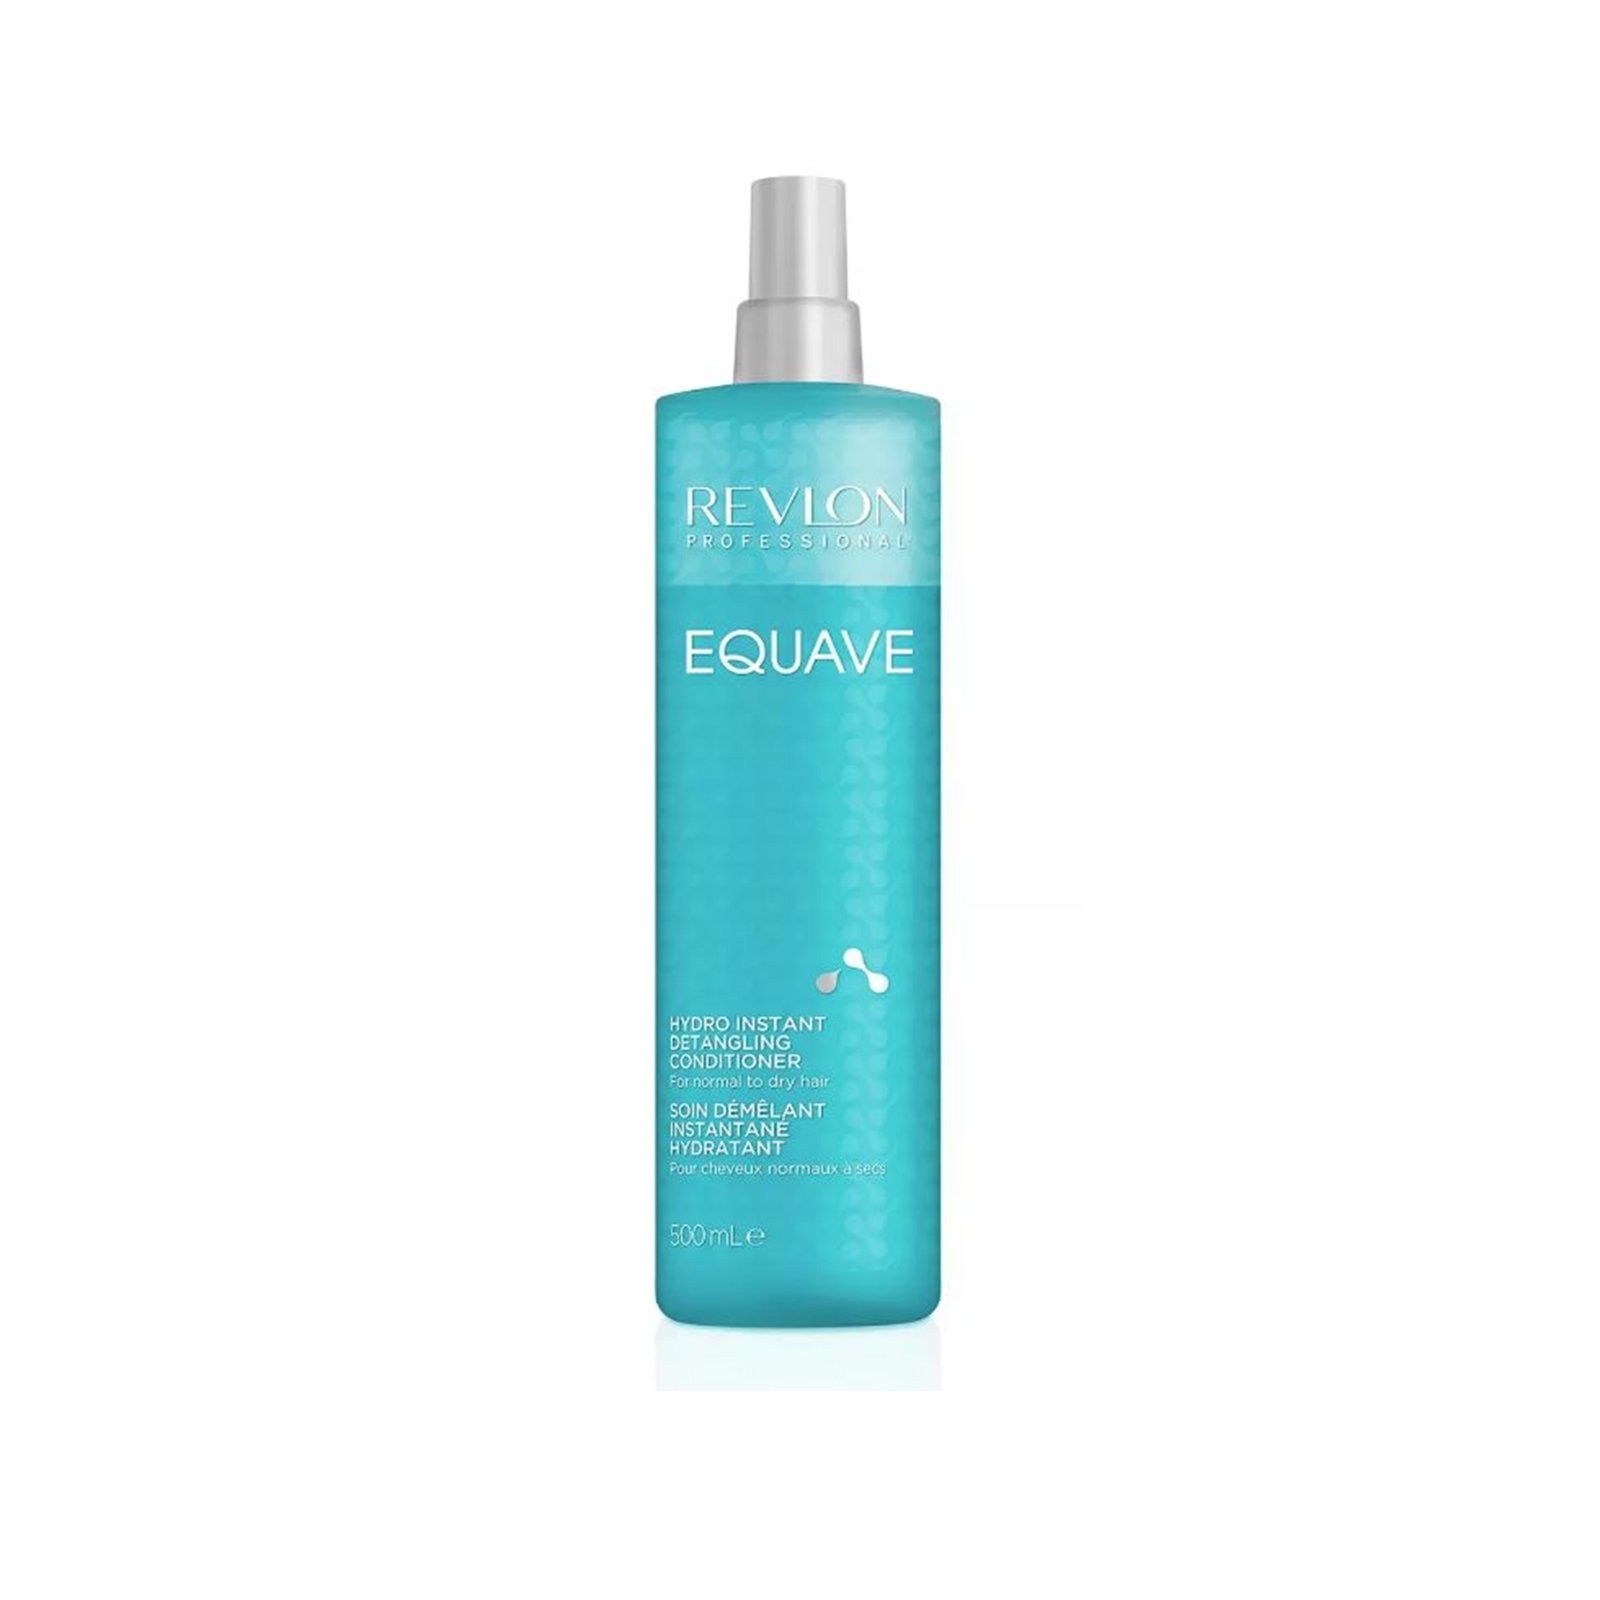 Revlon Professional Equave Conditioner Normal to Dry Hair 500ml (16.91fl oz)